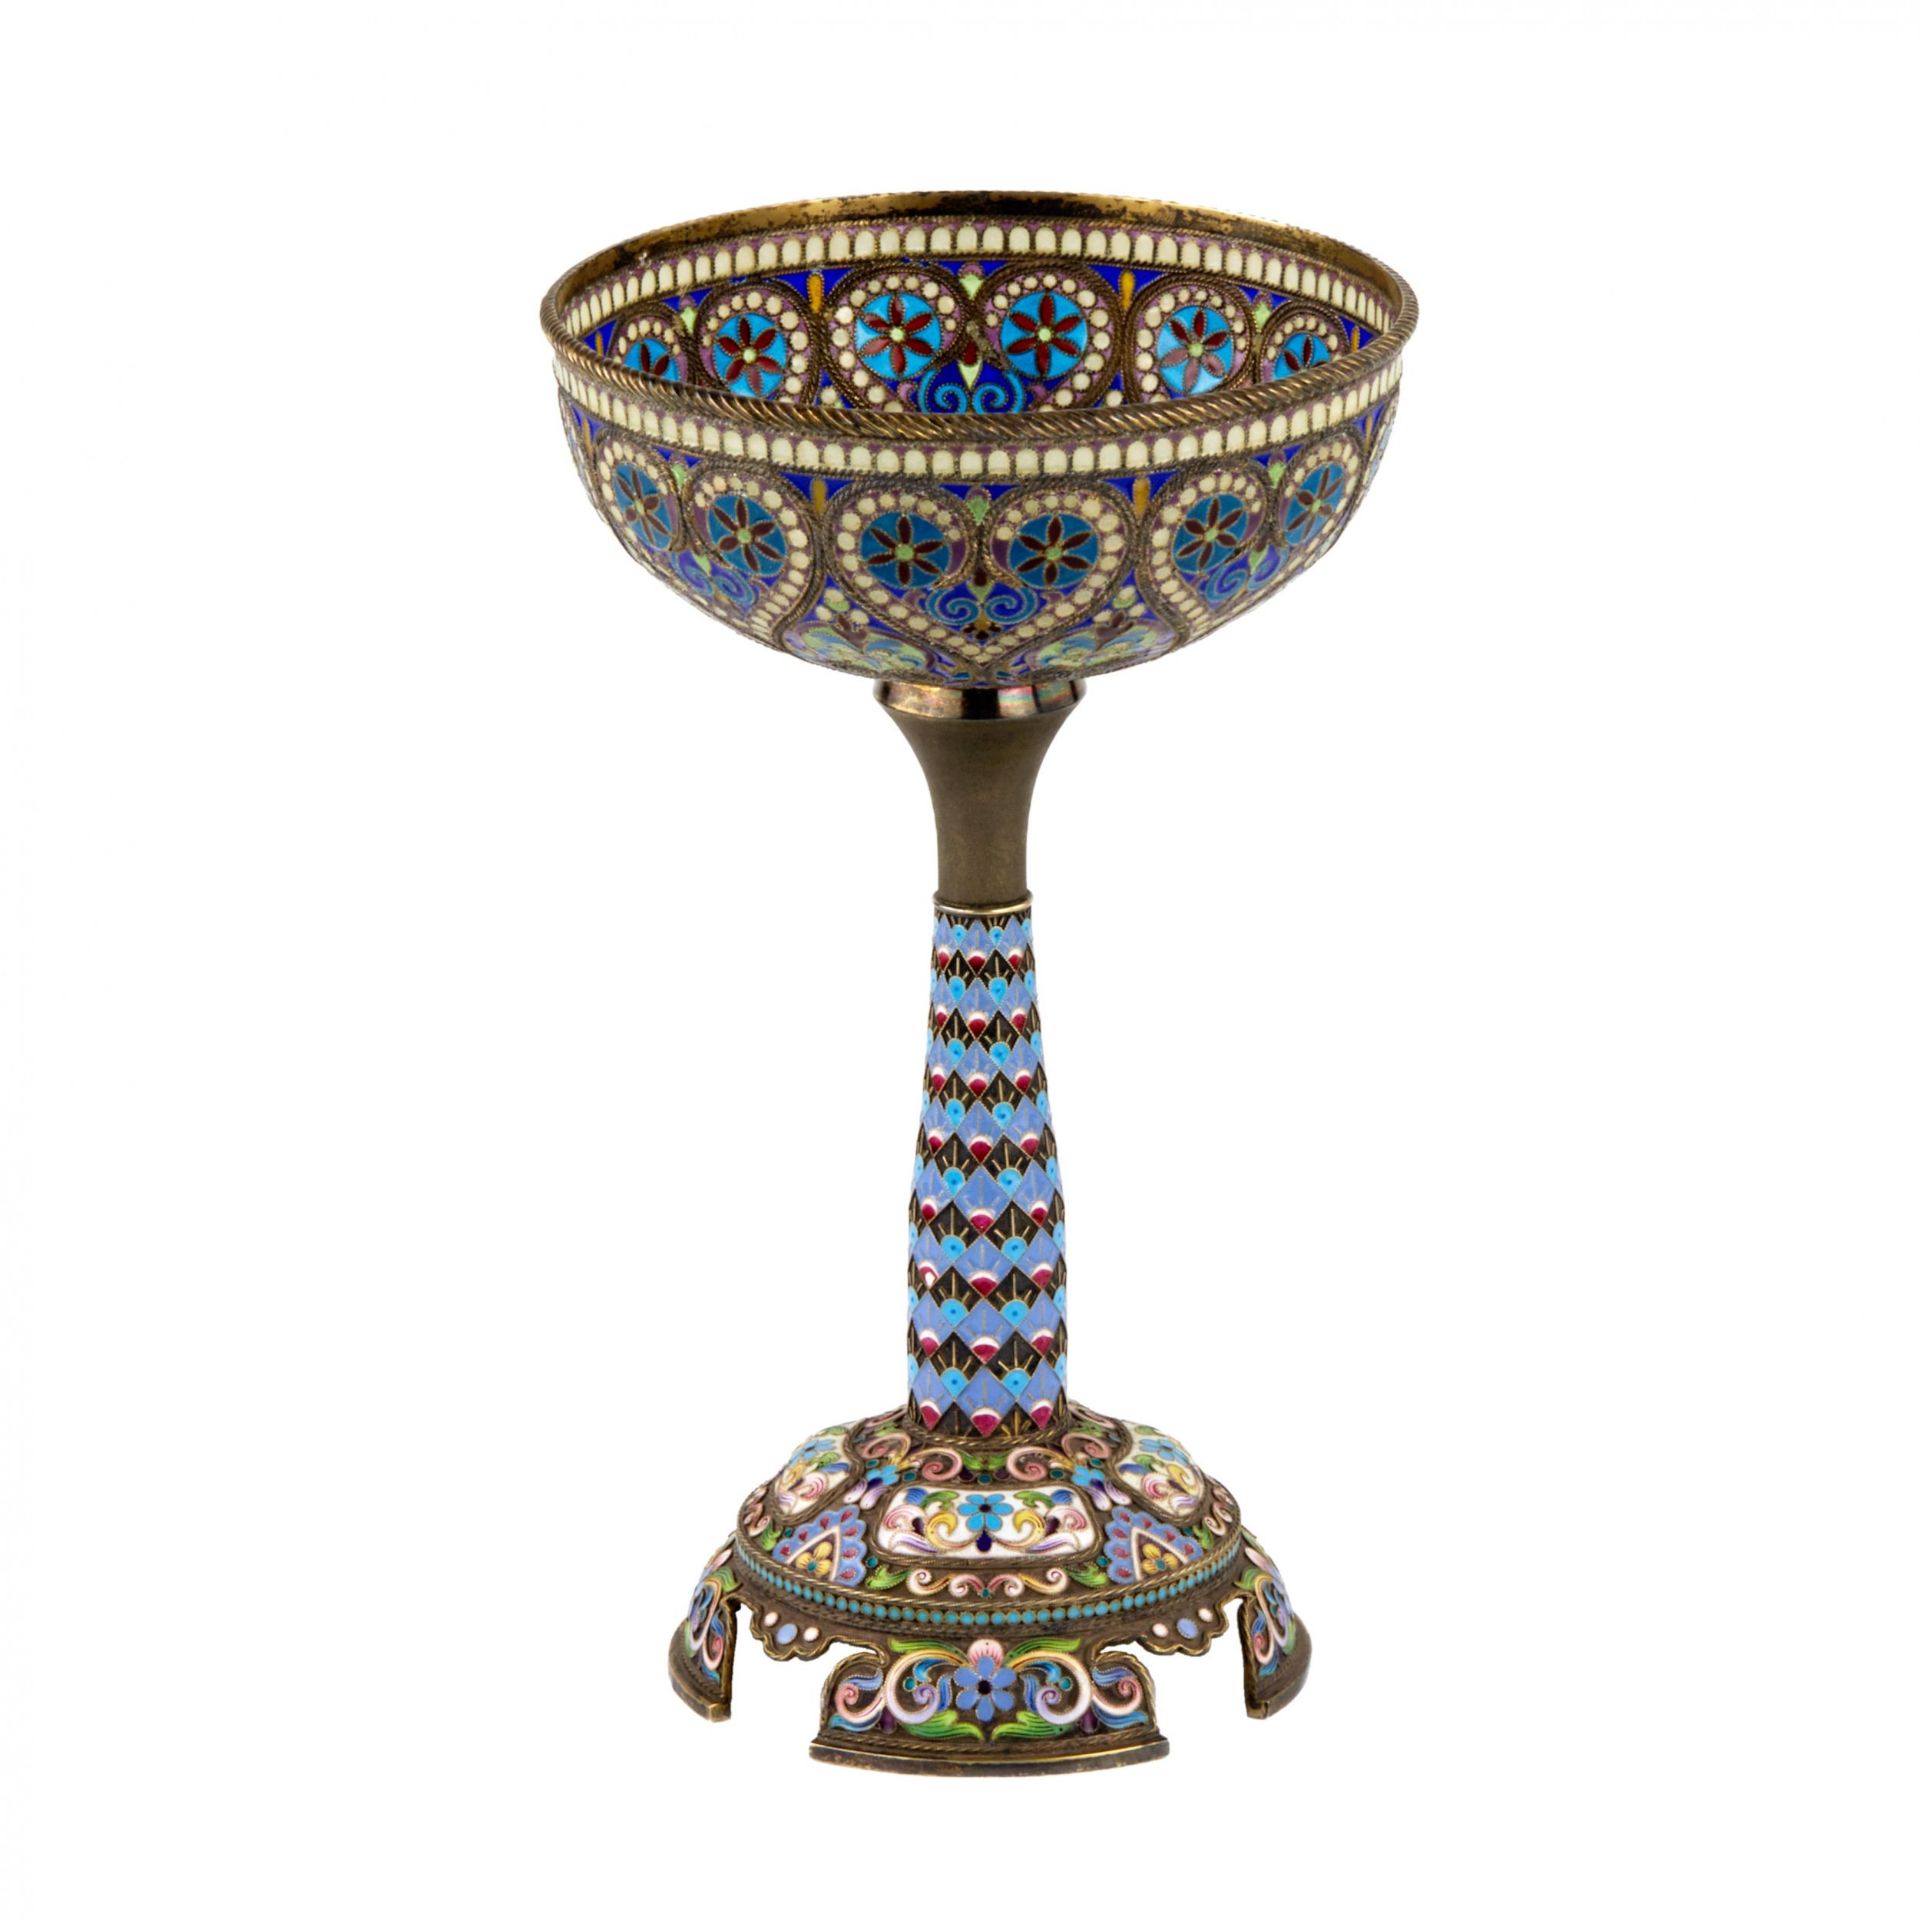 The magnificent silver goblet of Ivan Khlebnikov: painted, cloisonne, and stained glass enamels. - Image 2 of 6